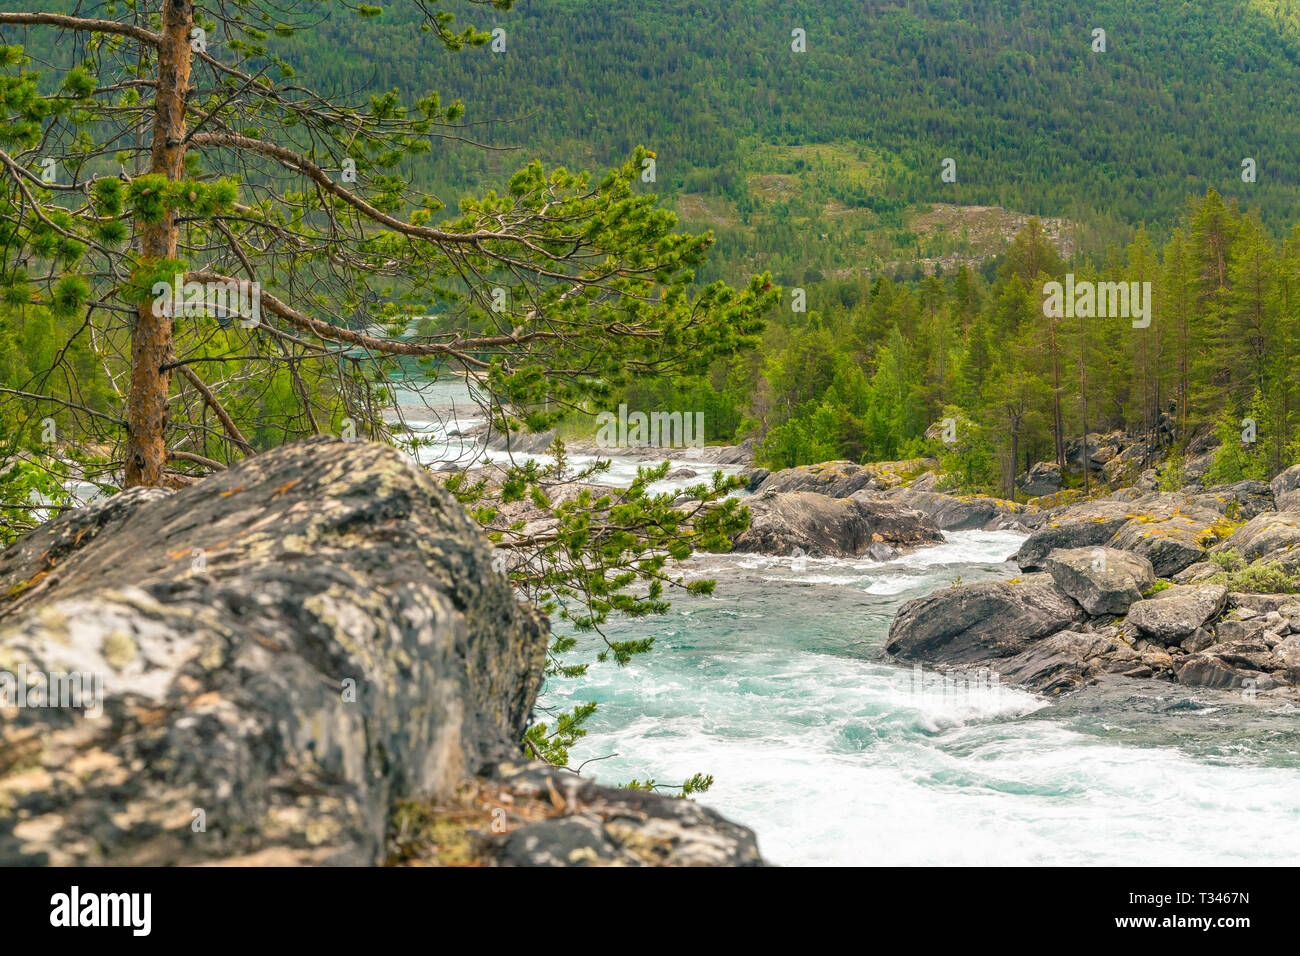 Mountain wild river valley landscape. Mountain river flowing through the green forest. Panoramic view of the mountain river. Raging mountain river in  Stock Photo